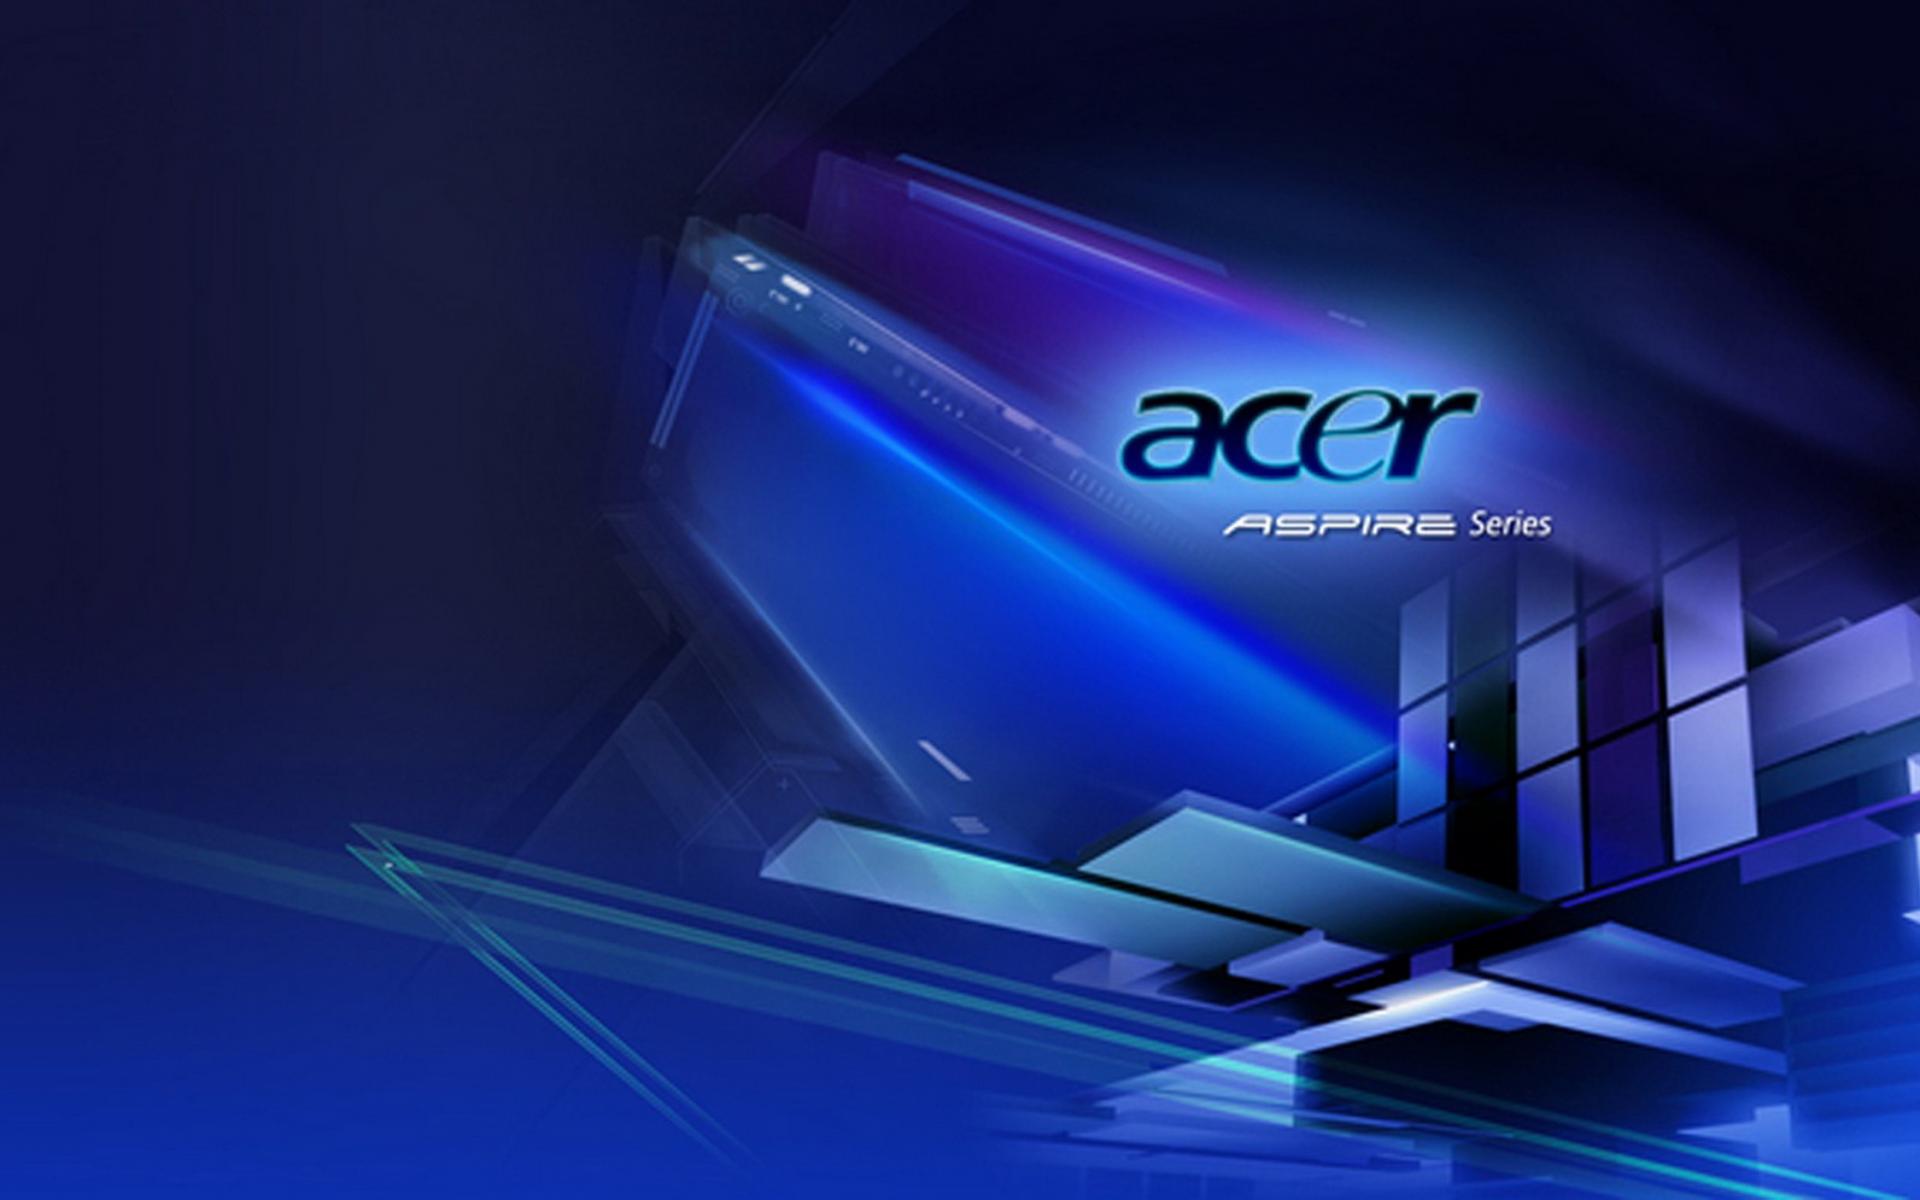 Acer Aspire Series Blue Background Wallpaper Download wallpapers